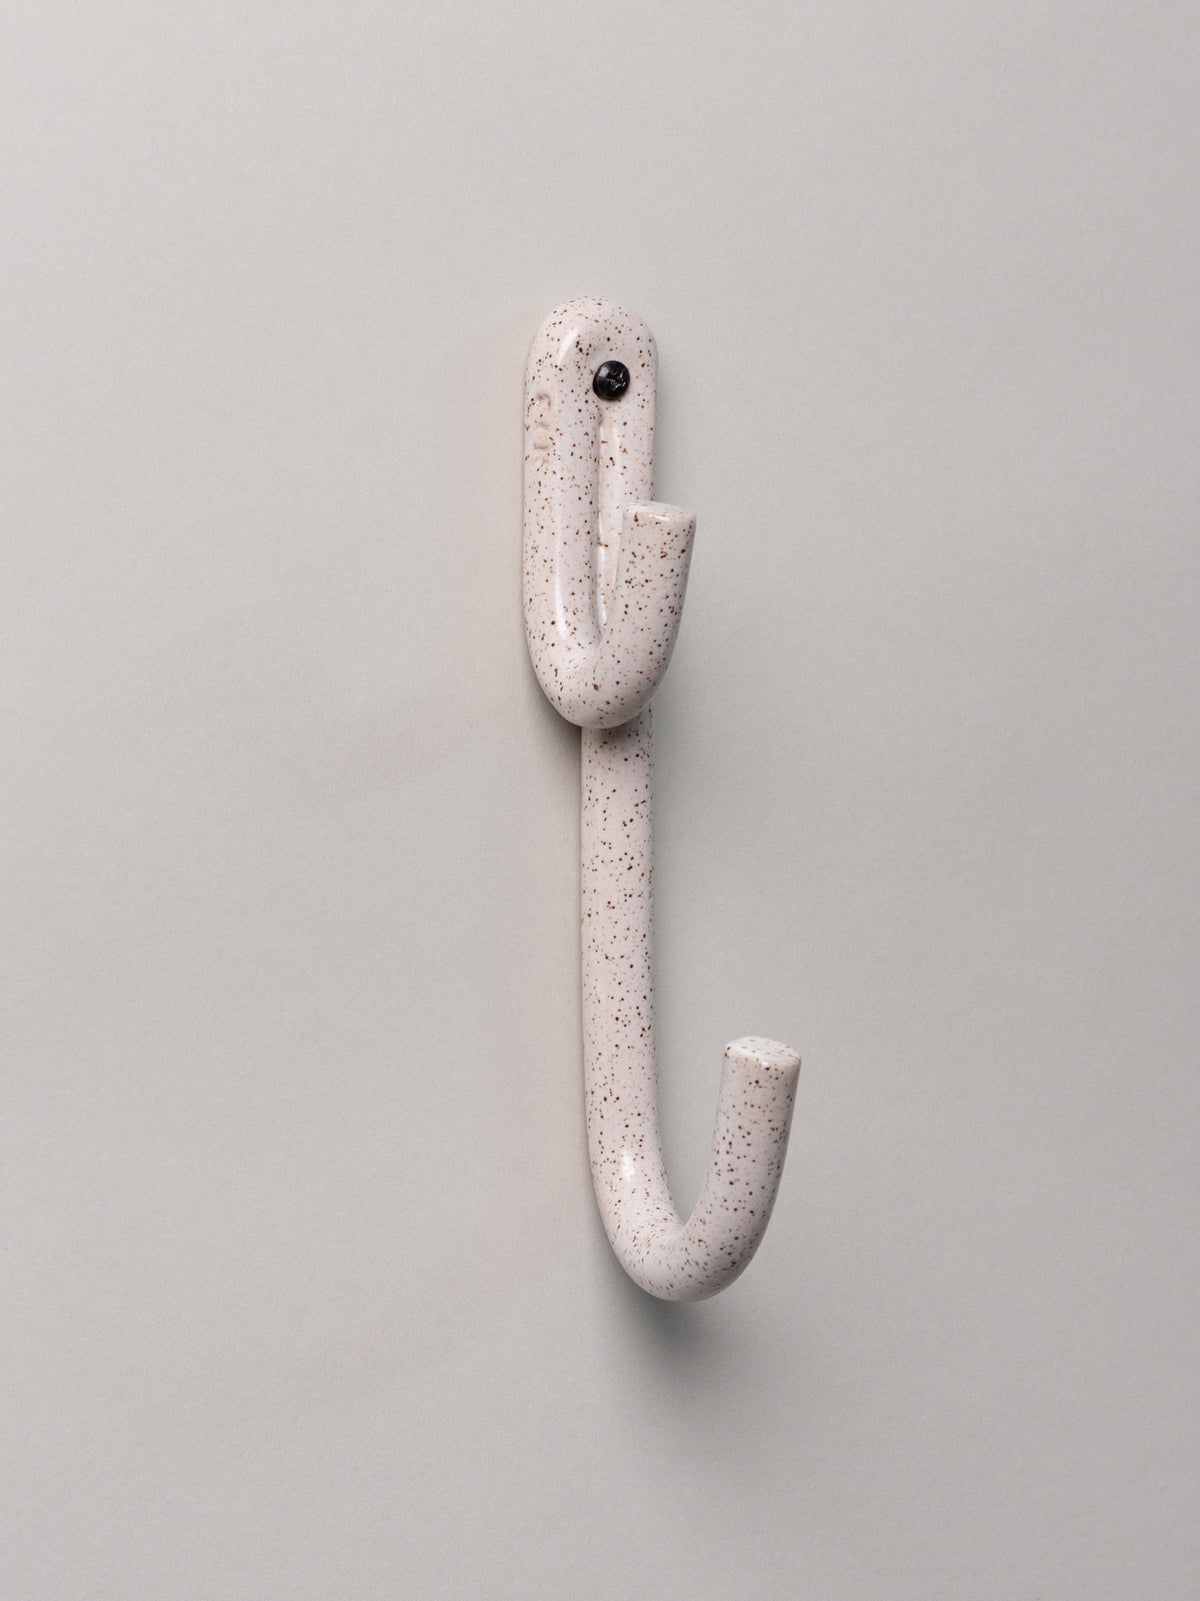 Leggy Long Wall Hook, Speckled: SIN ceramics & home goods - Made in  Brooklyn – SIN